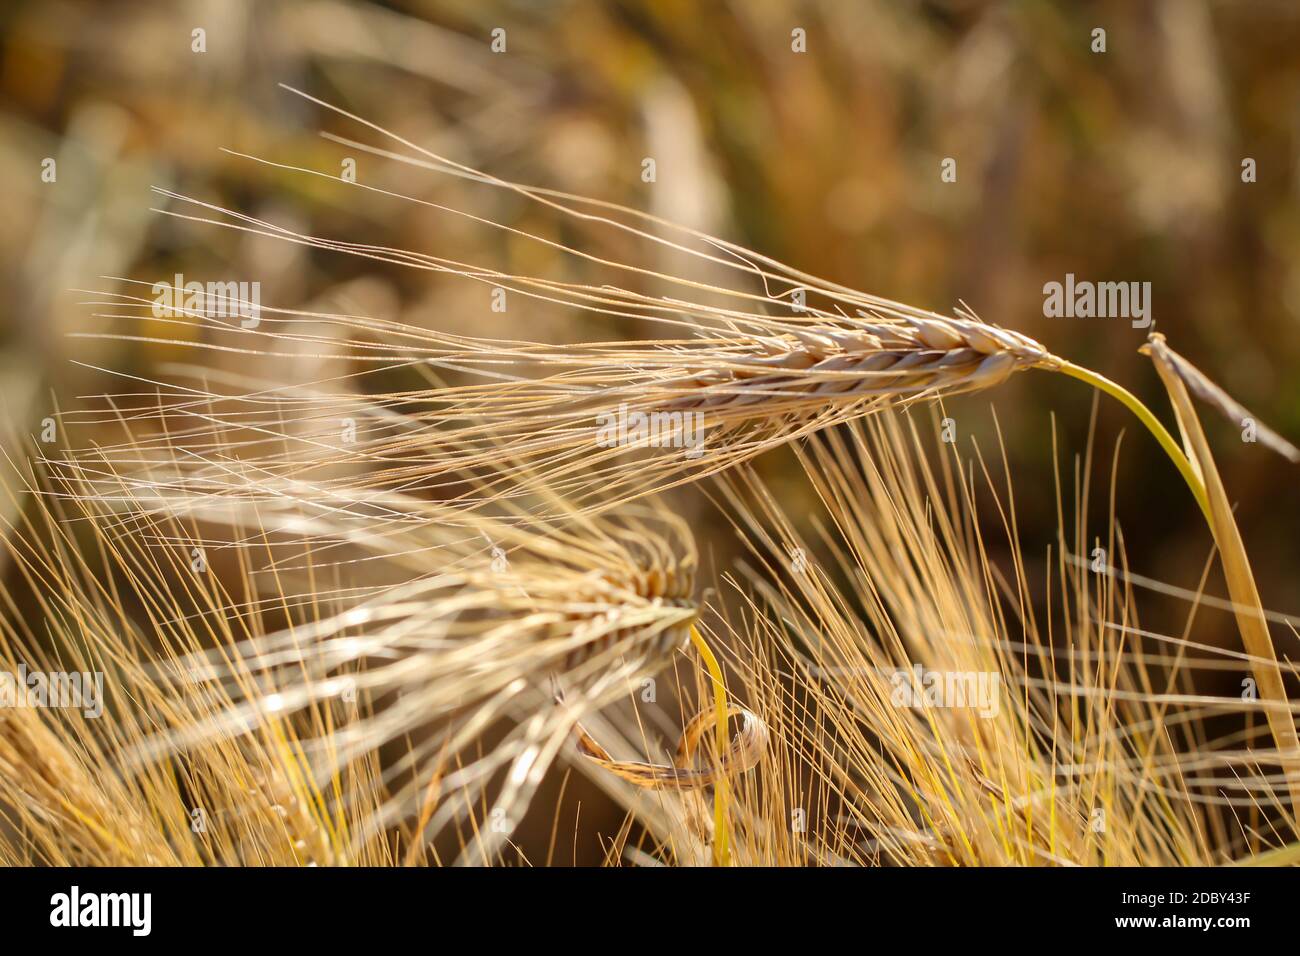 View of a grain field with ears of wheat that will soon be ripe. Stock Photo